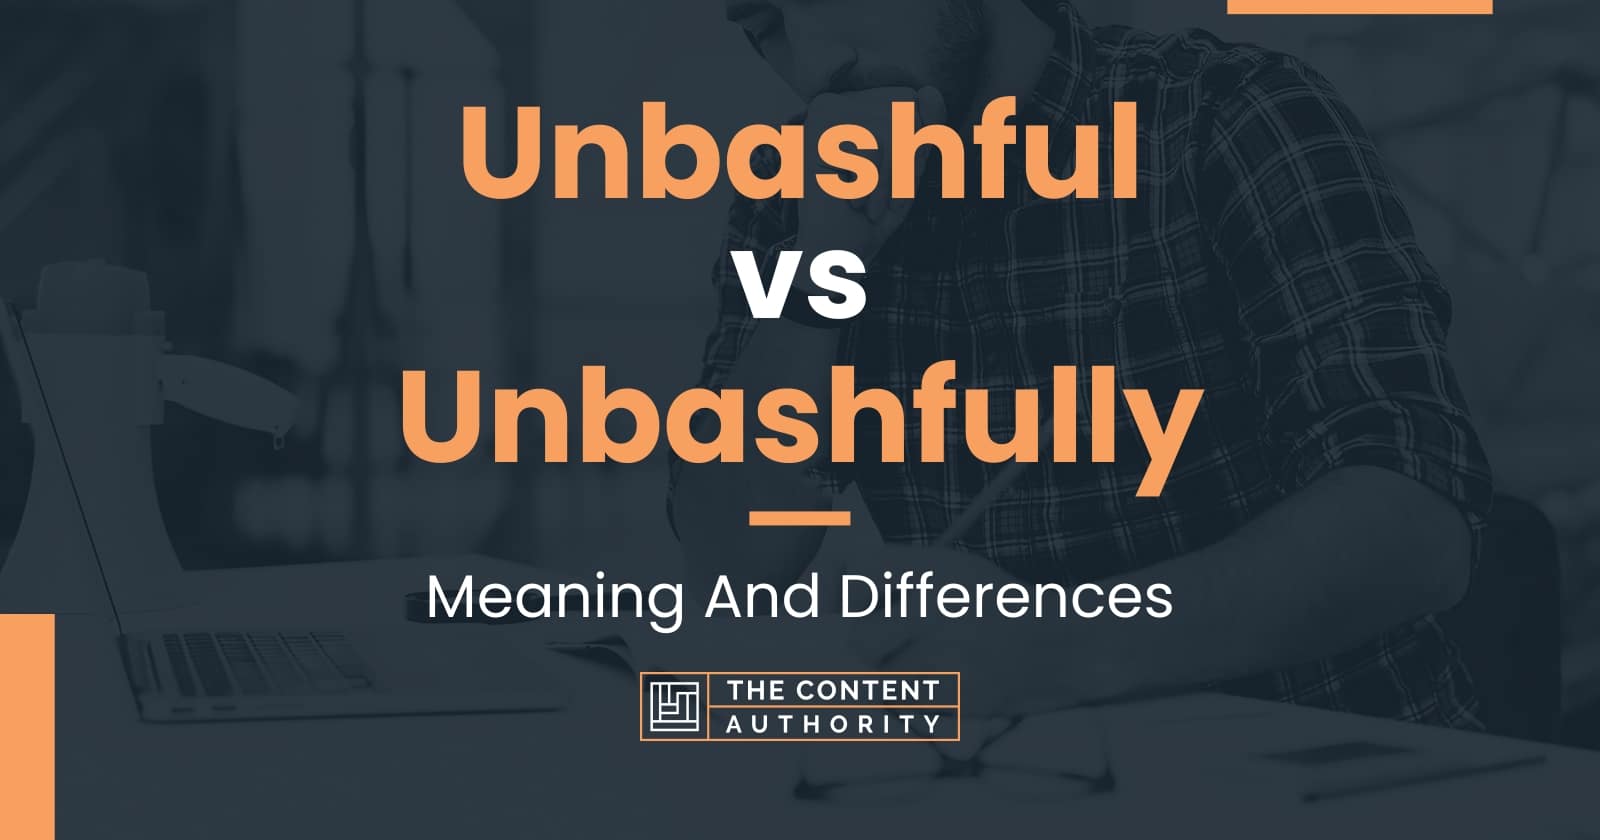 Unbashful vs Unbashfully: Meaning And Differences